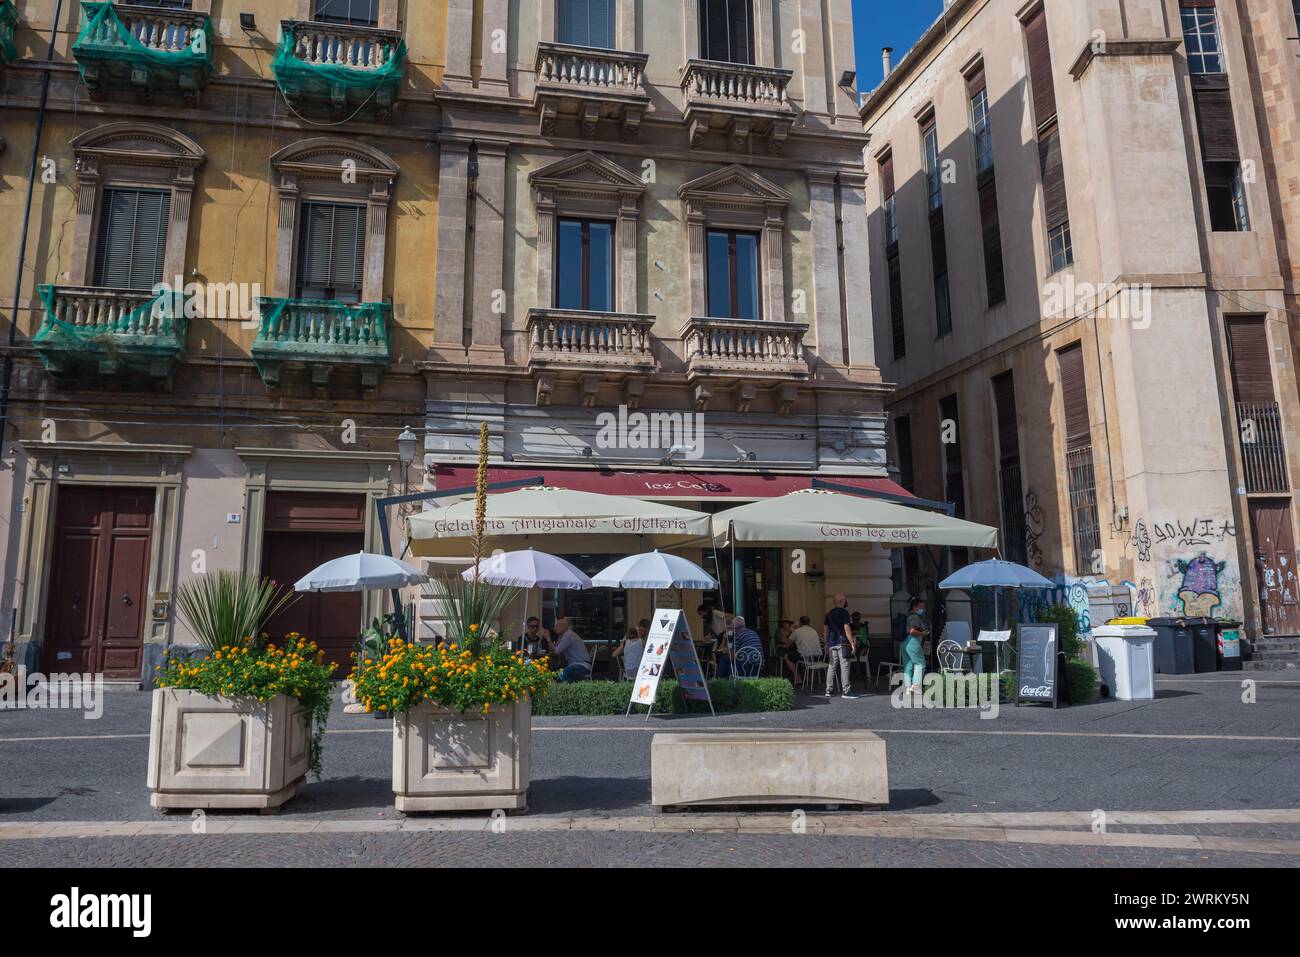 Cafeteria on Vincenzo Bellini Square in historic part of Catania city on the island of Sicily, Italy Stock Photo